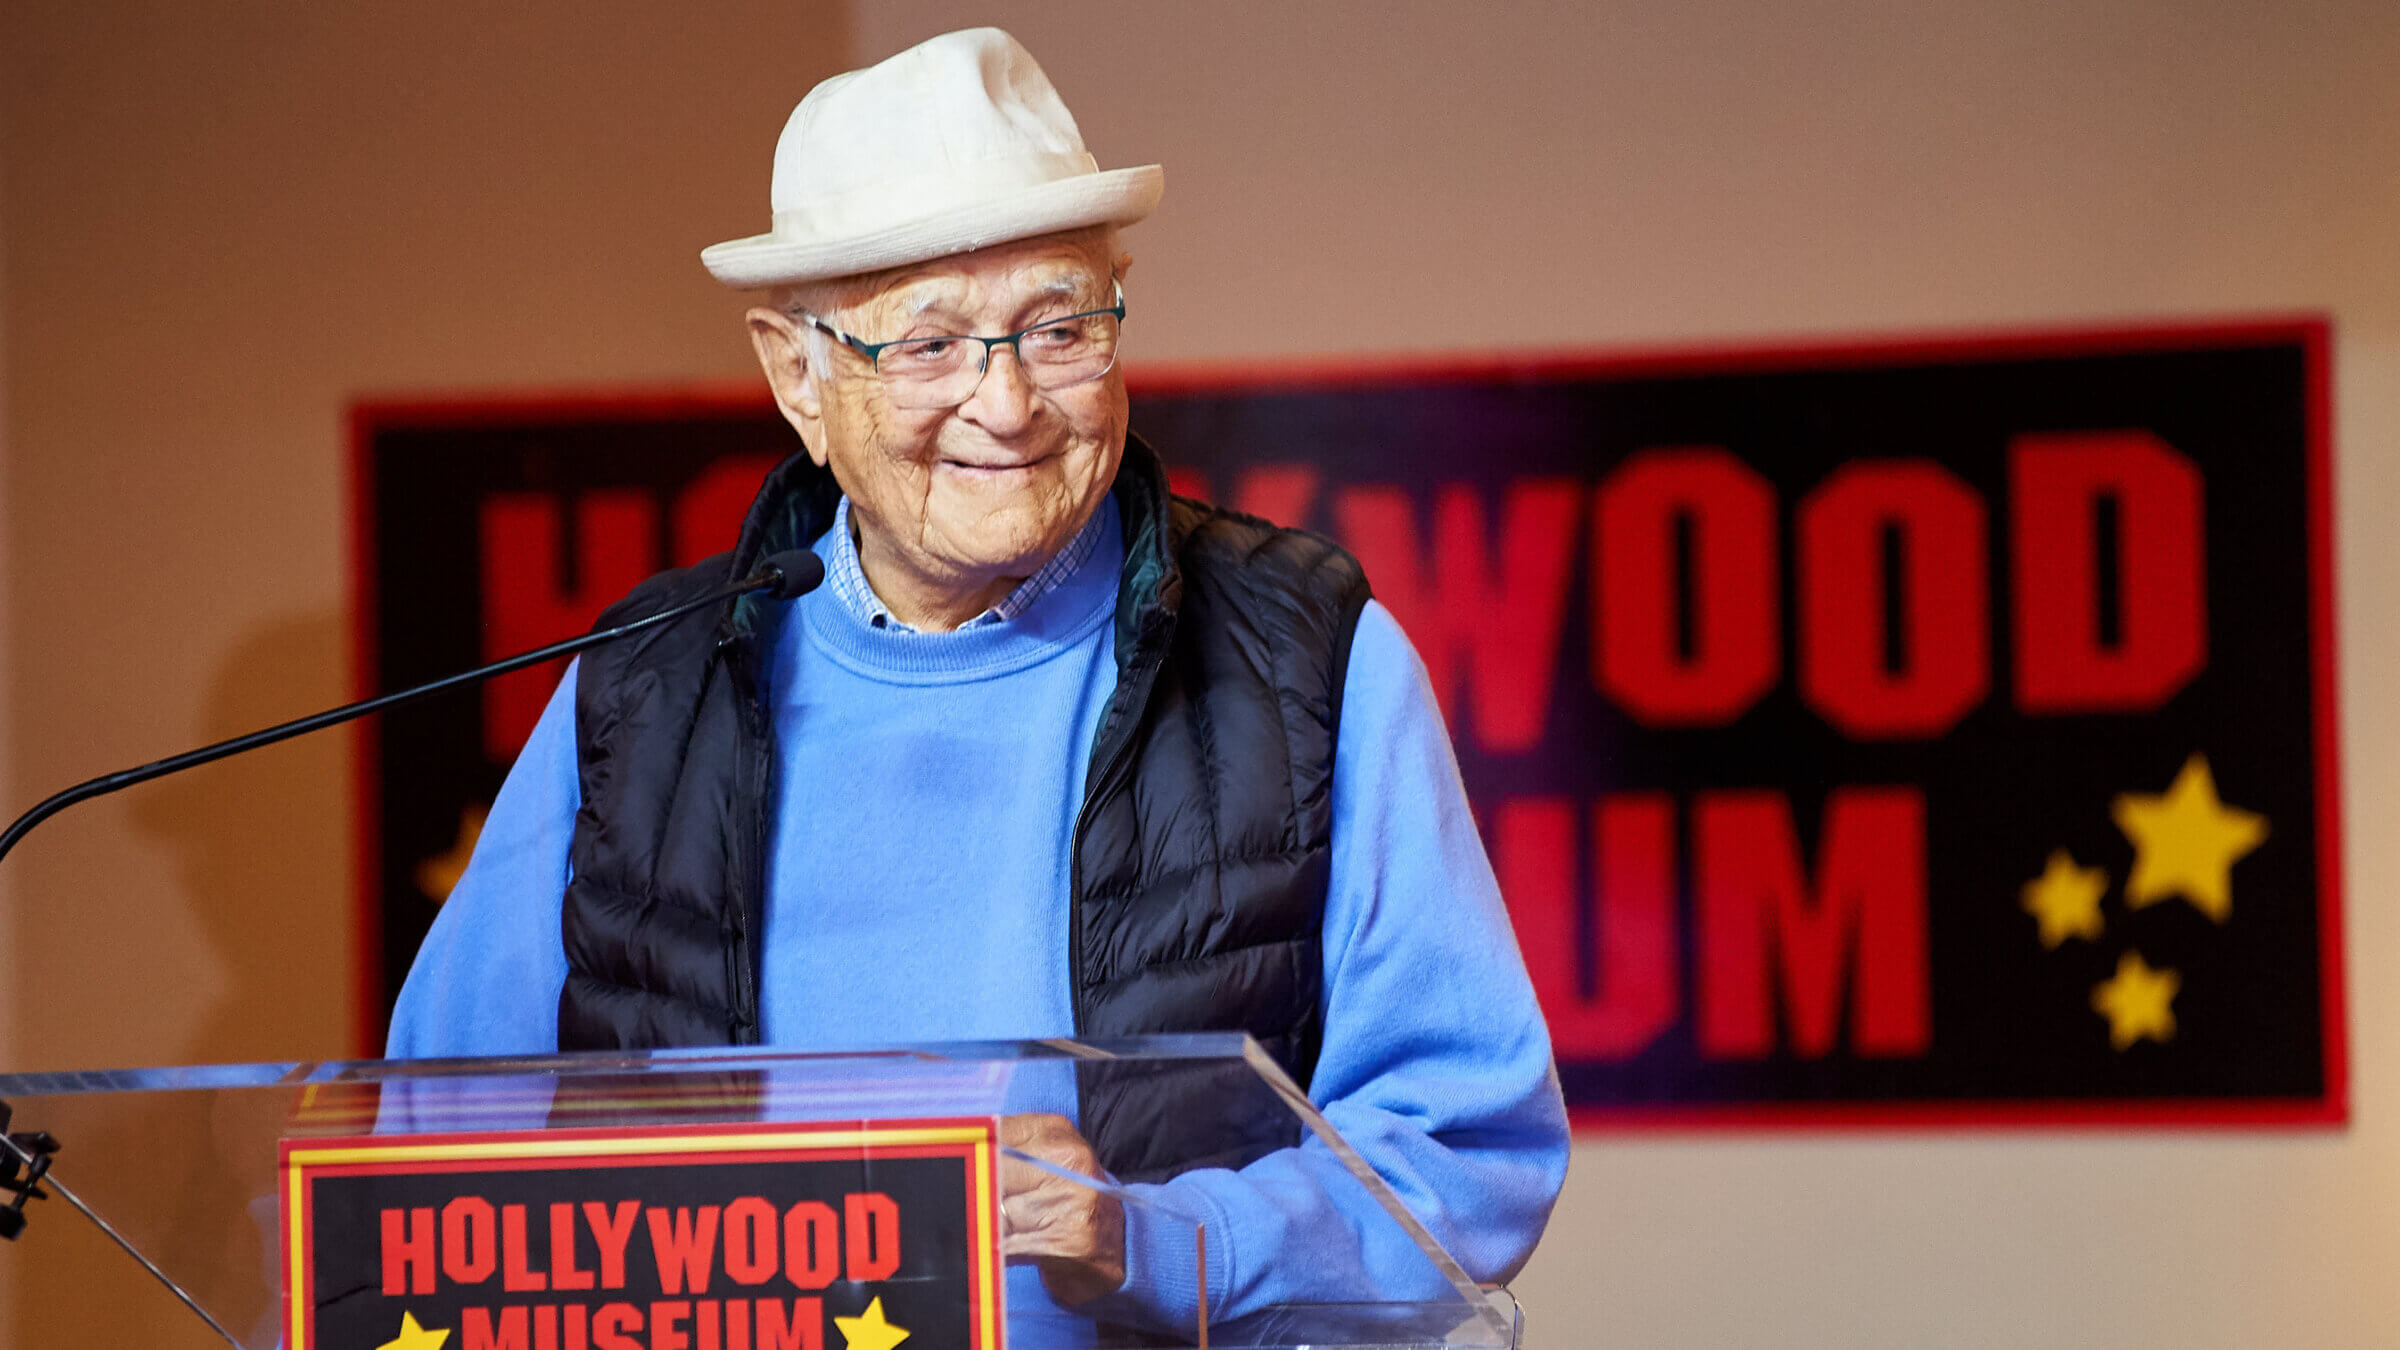 Norman Lear, creator of "All in the Family" and developer of many other sitcoms turns 100 August 27.